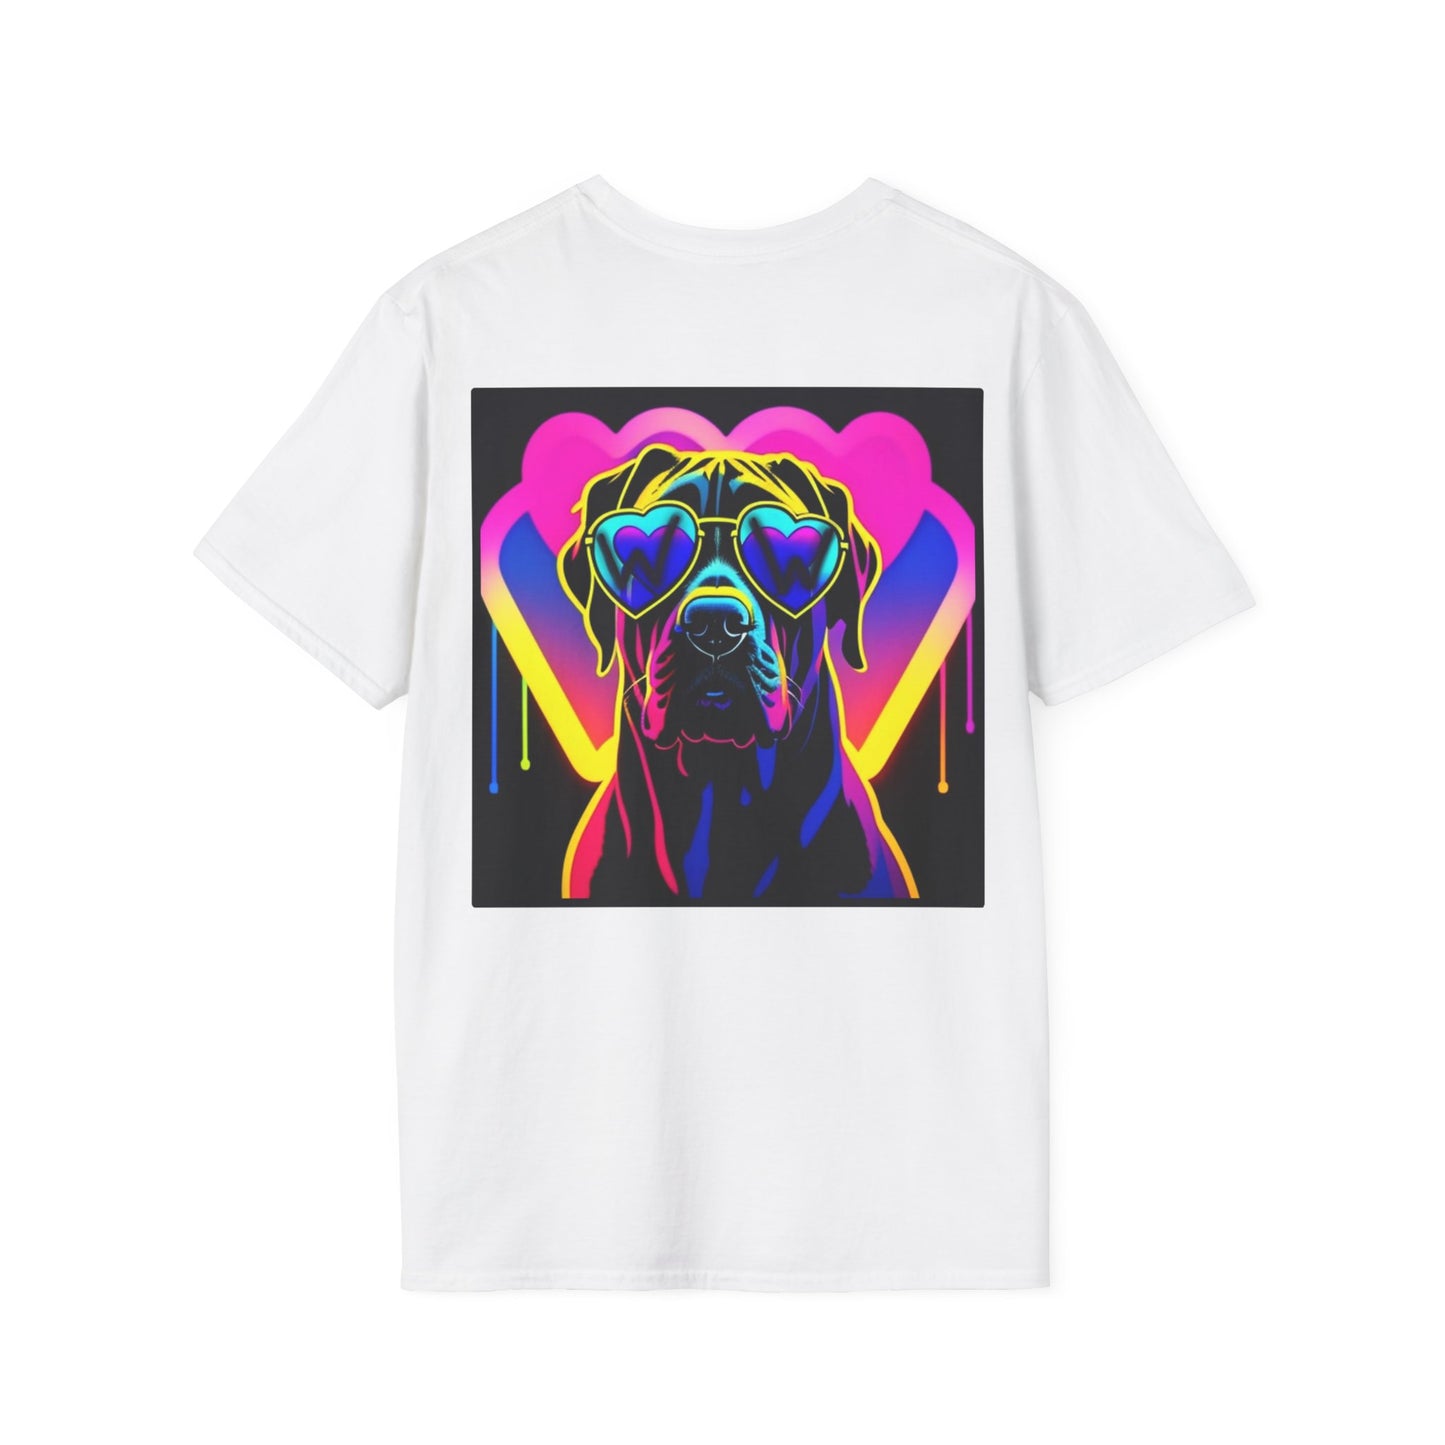 Brody's Electric love Graphic Tee